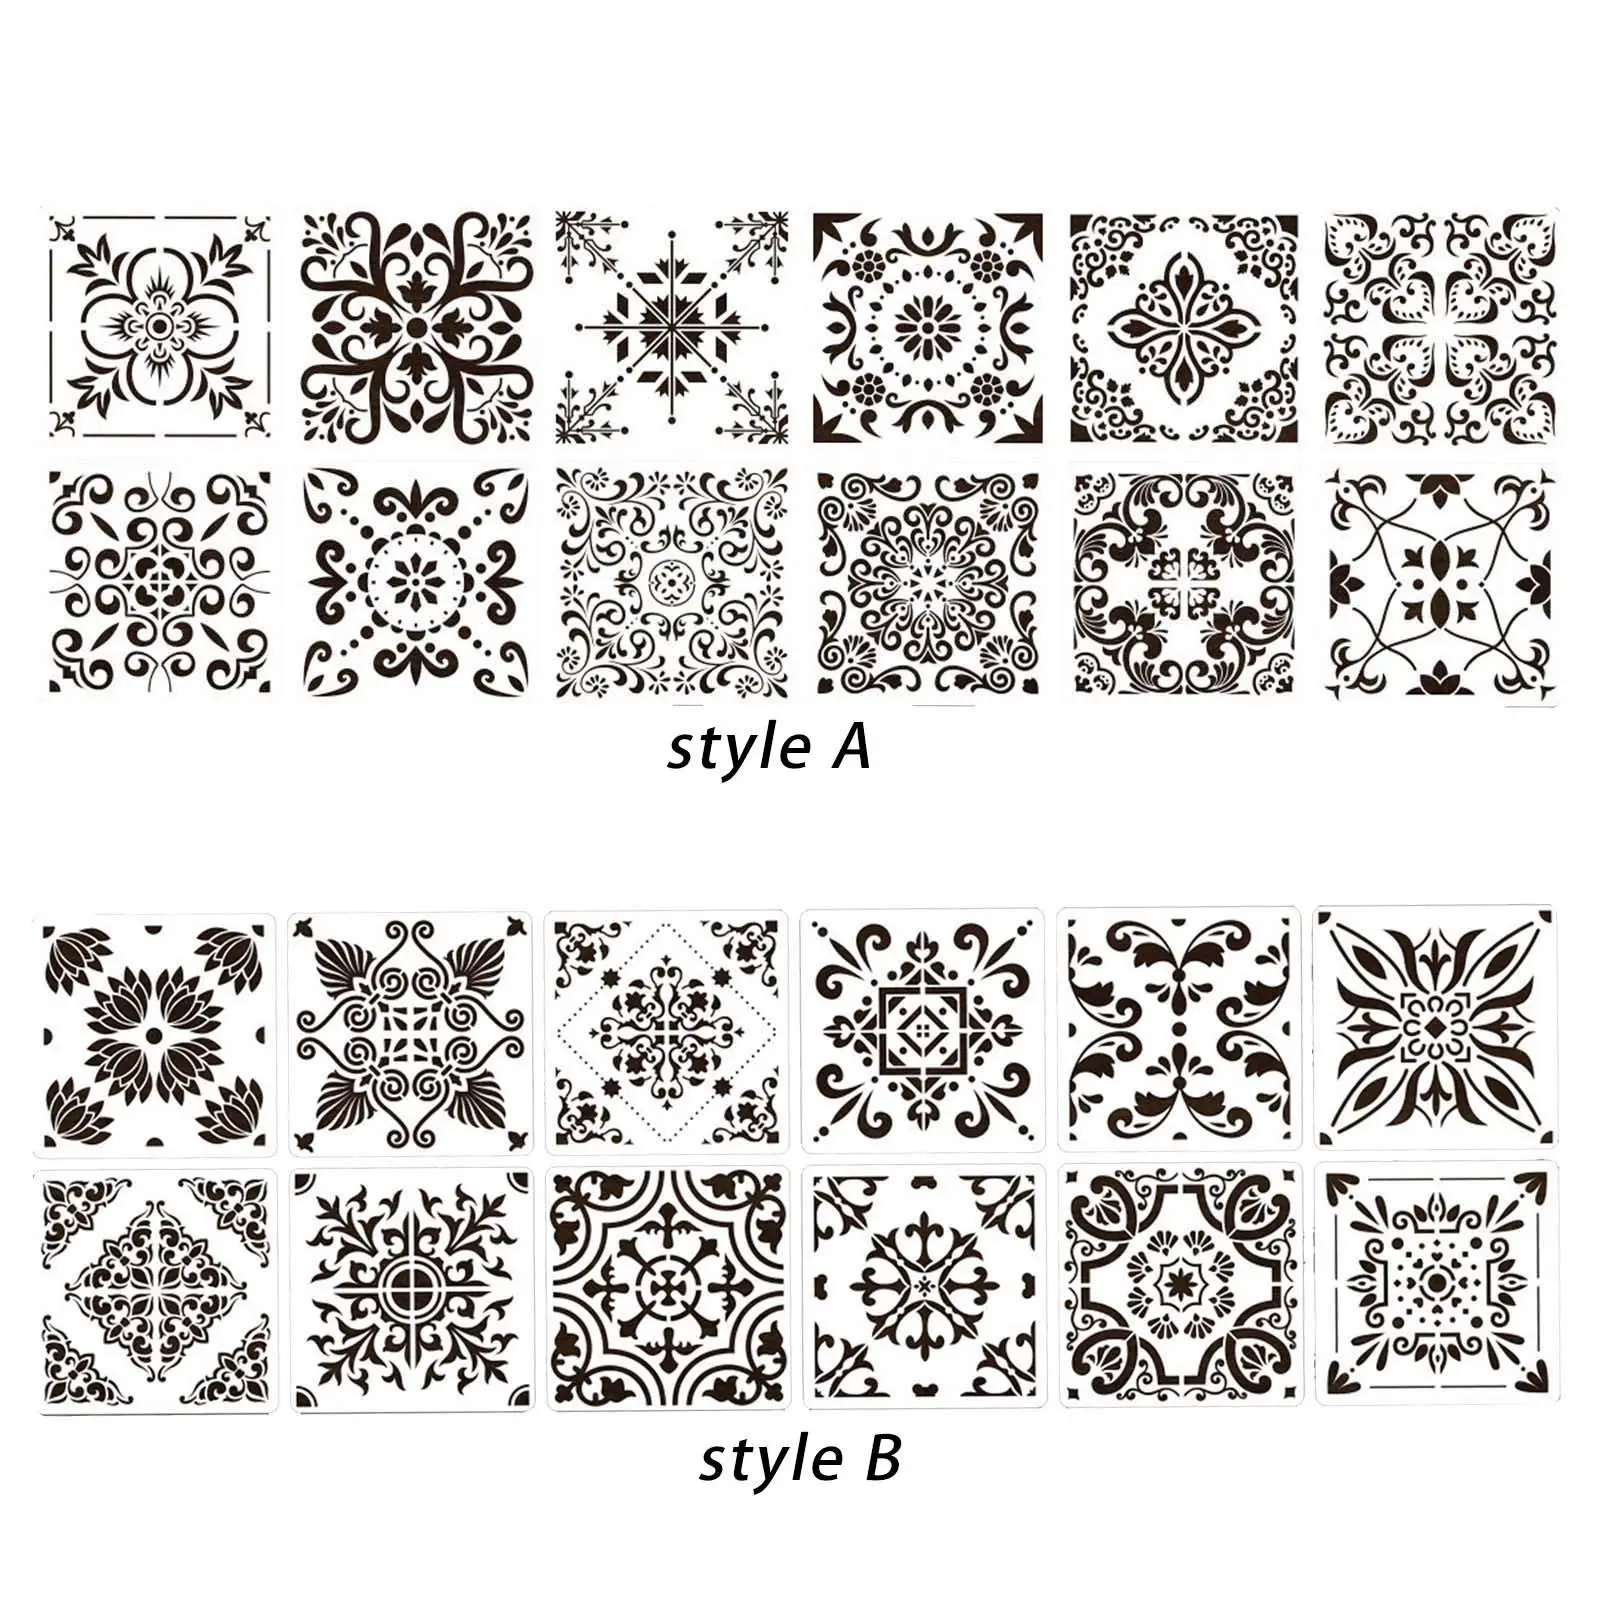 12x Drawing Templates Reused Tool DIY Craft Painting Mandala Stencil Template for Home